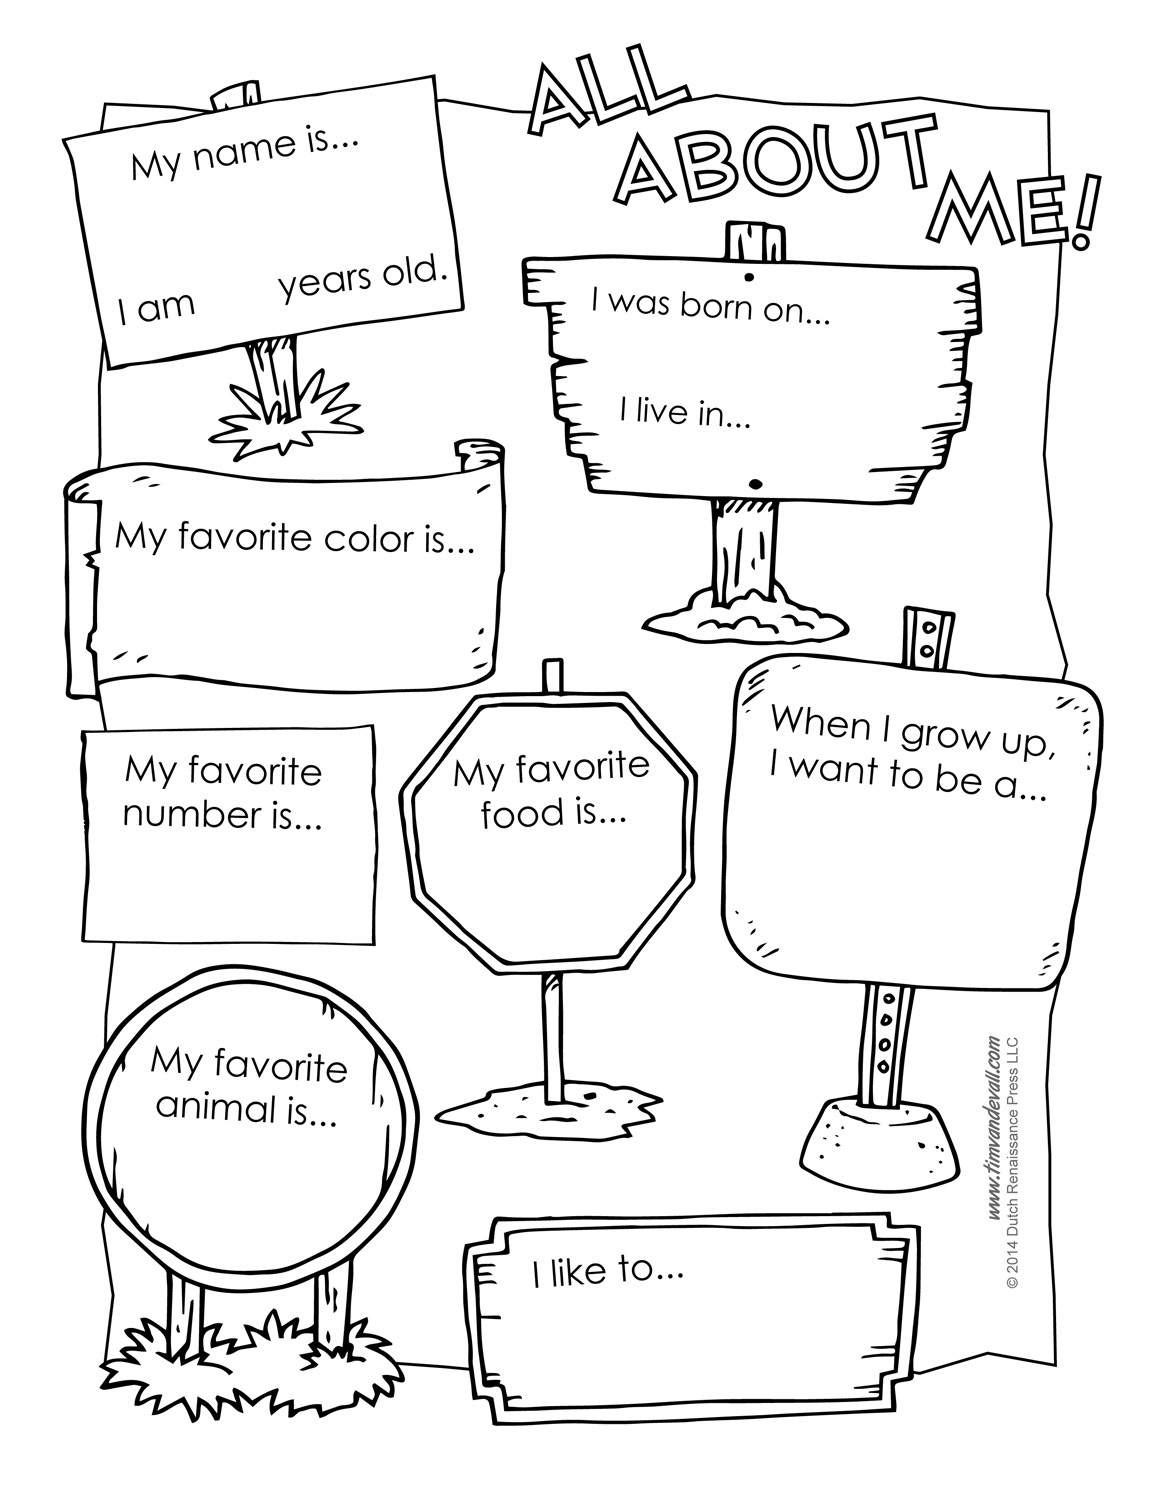 Printable All About Me Poster &amp; All About Me Template – Tim'S with Free Printable All About Me Poster